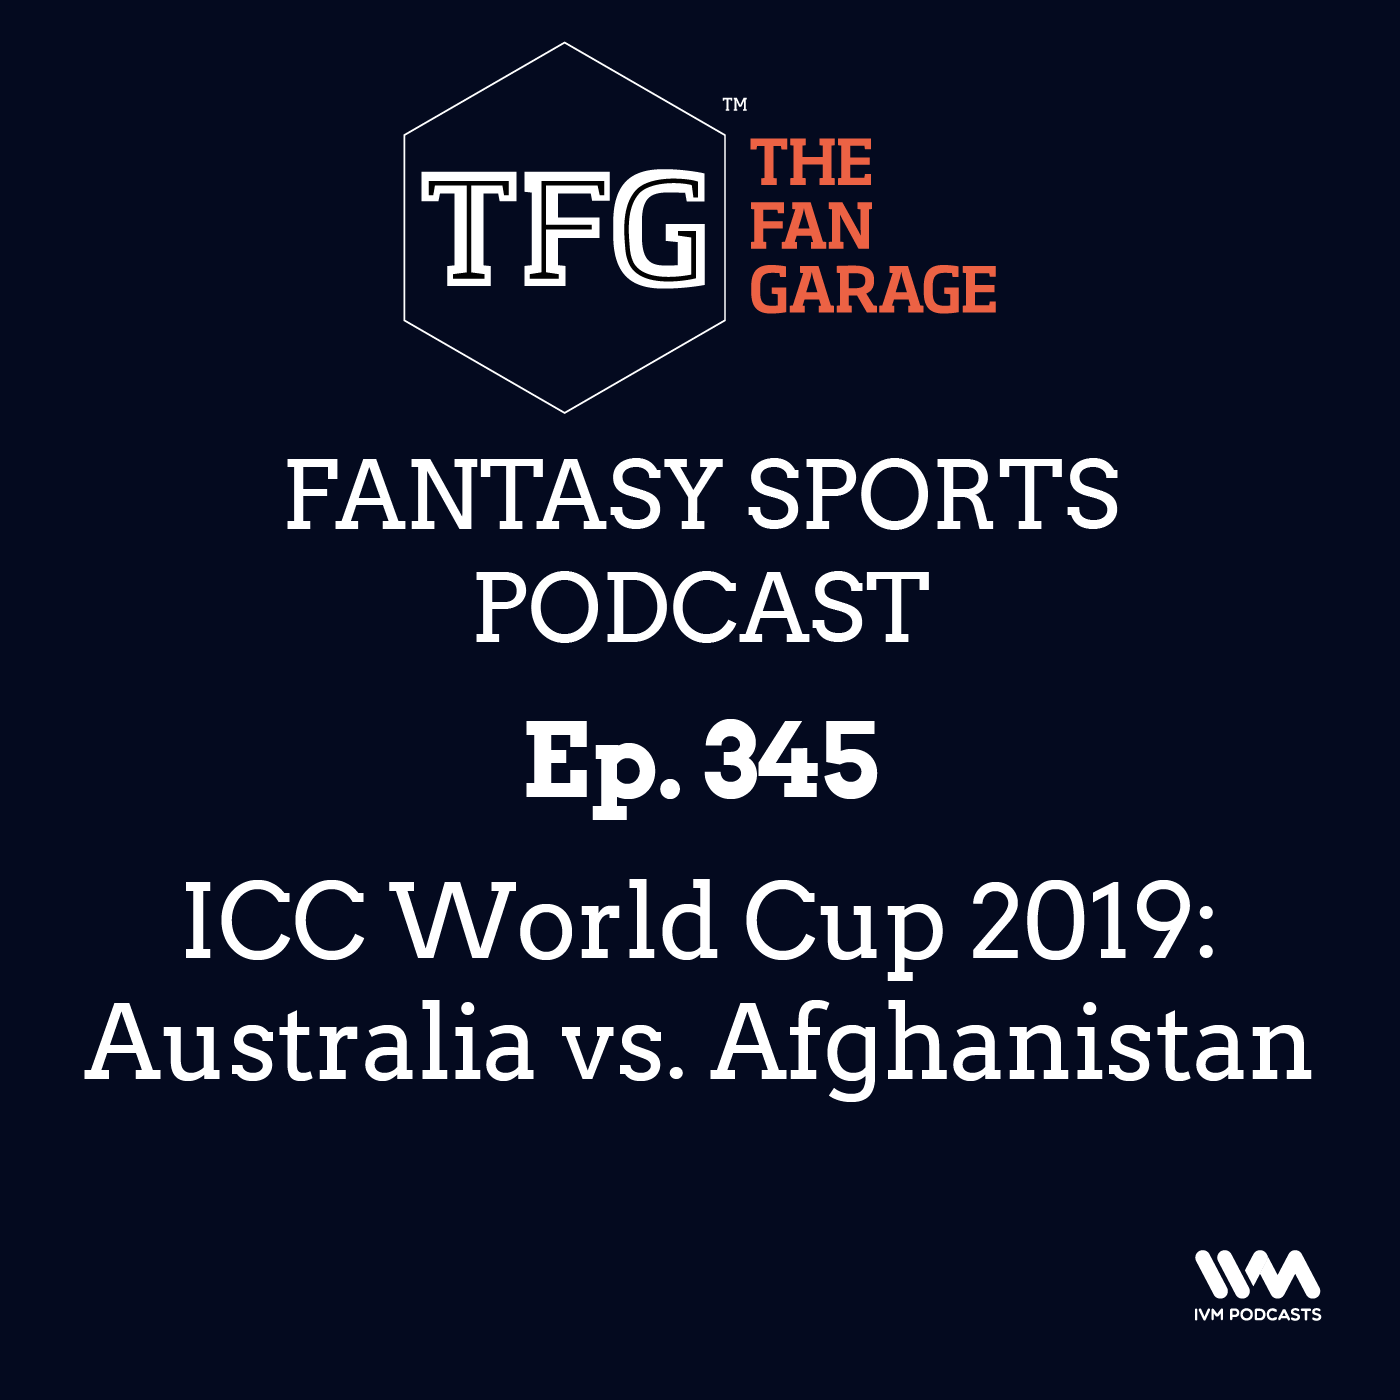 TFG Fantasy Sports Podcast Ep. 345: ICC World Cup 2019: Australia vs. Afghanistan